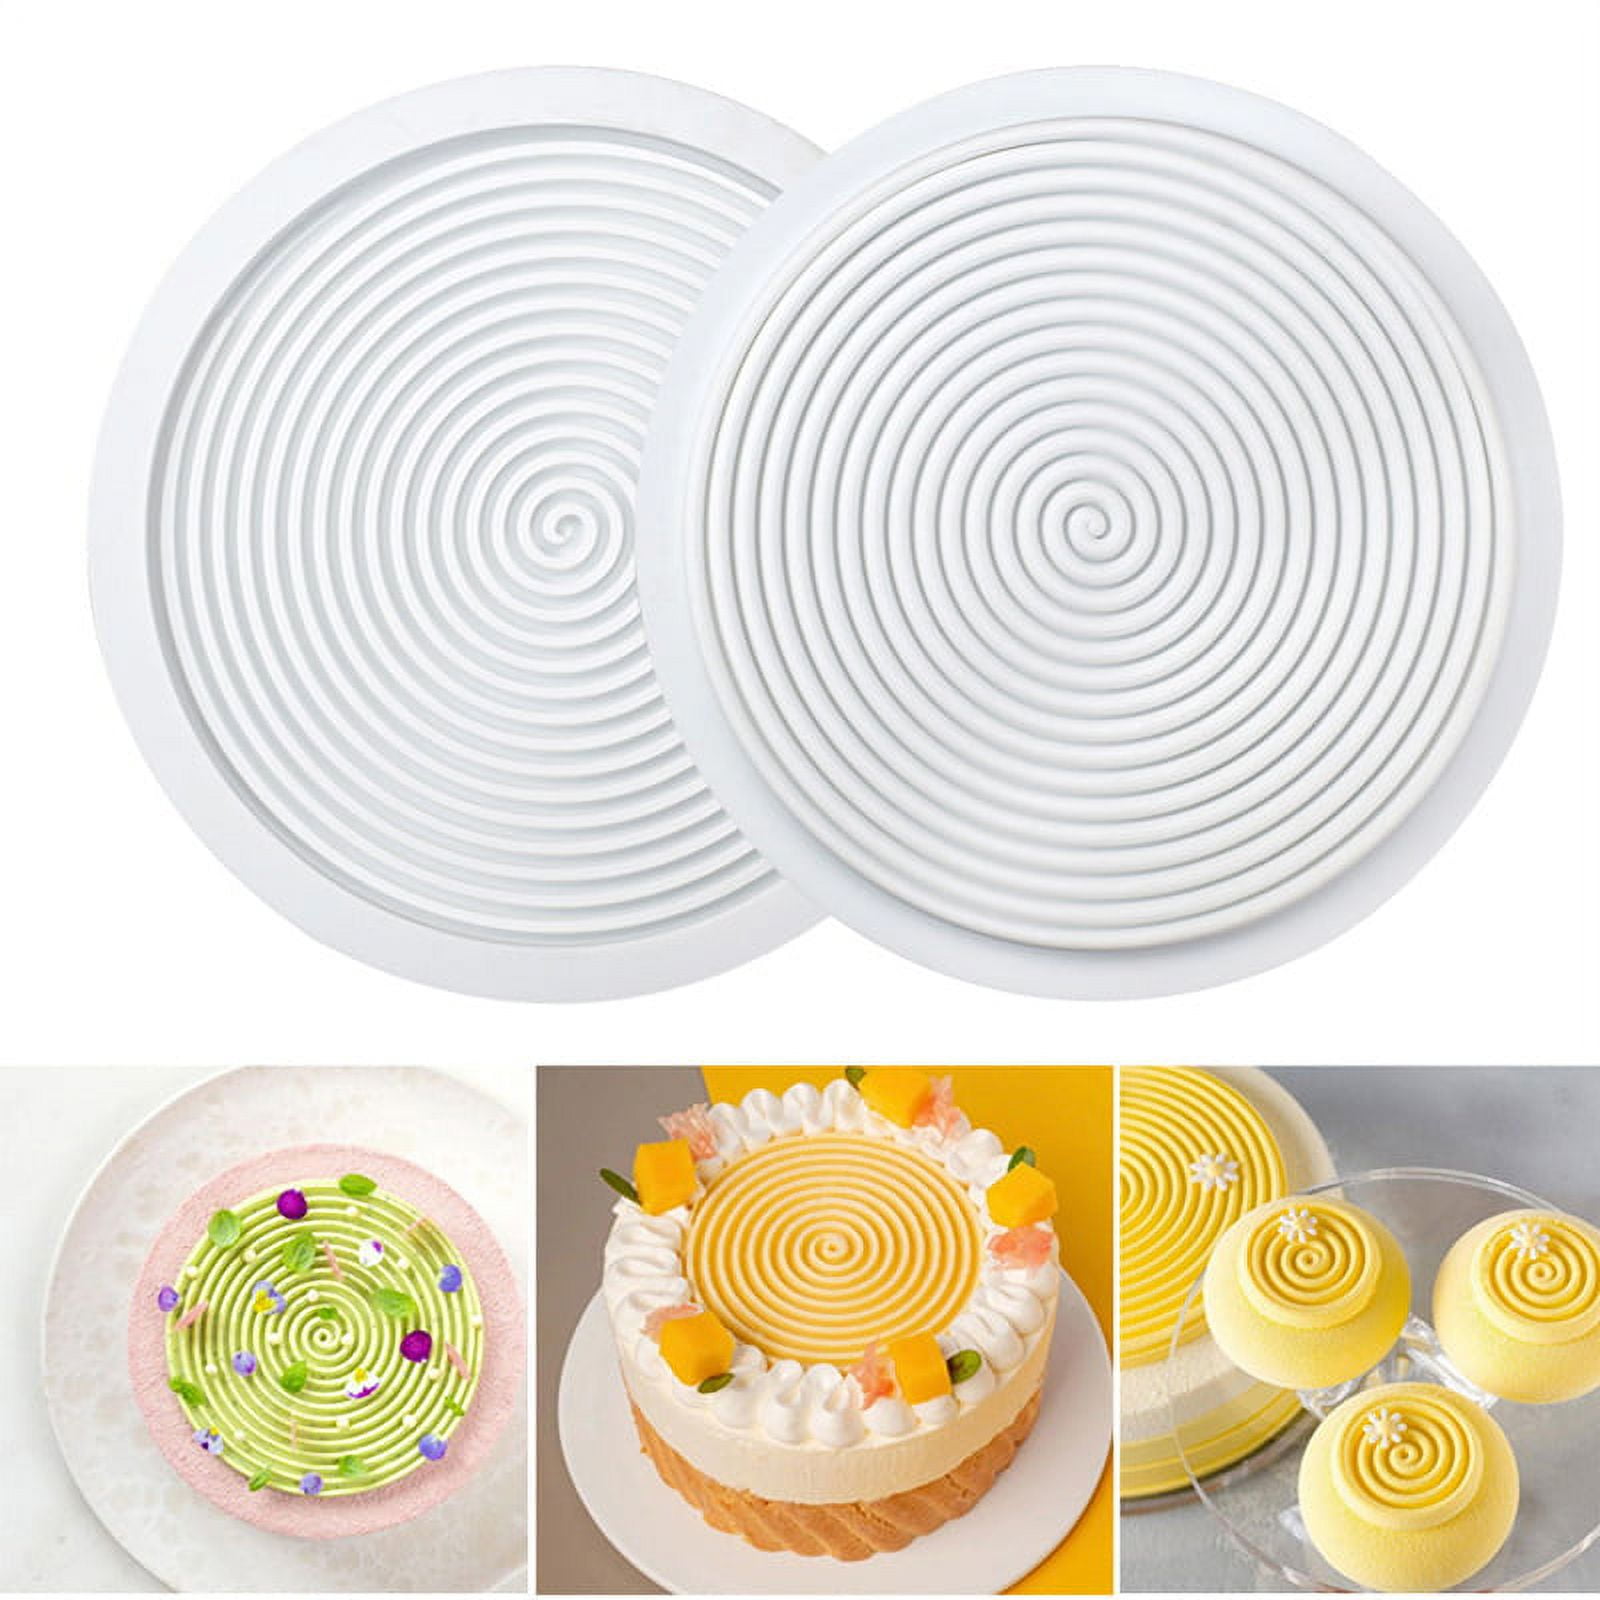  Spiral Silicone Molds for Baking Supplies - Silicone